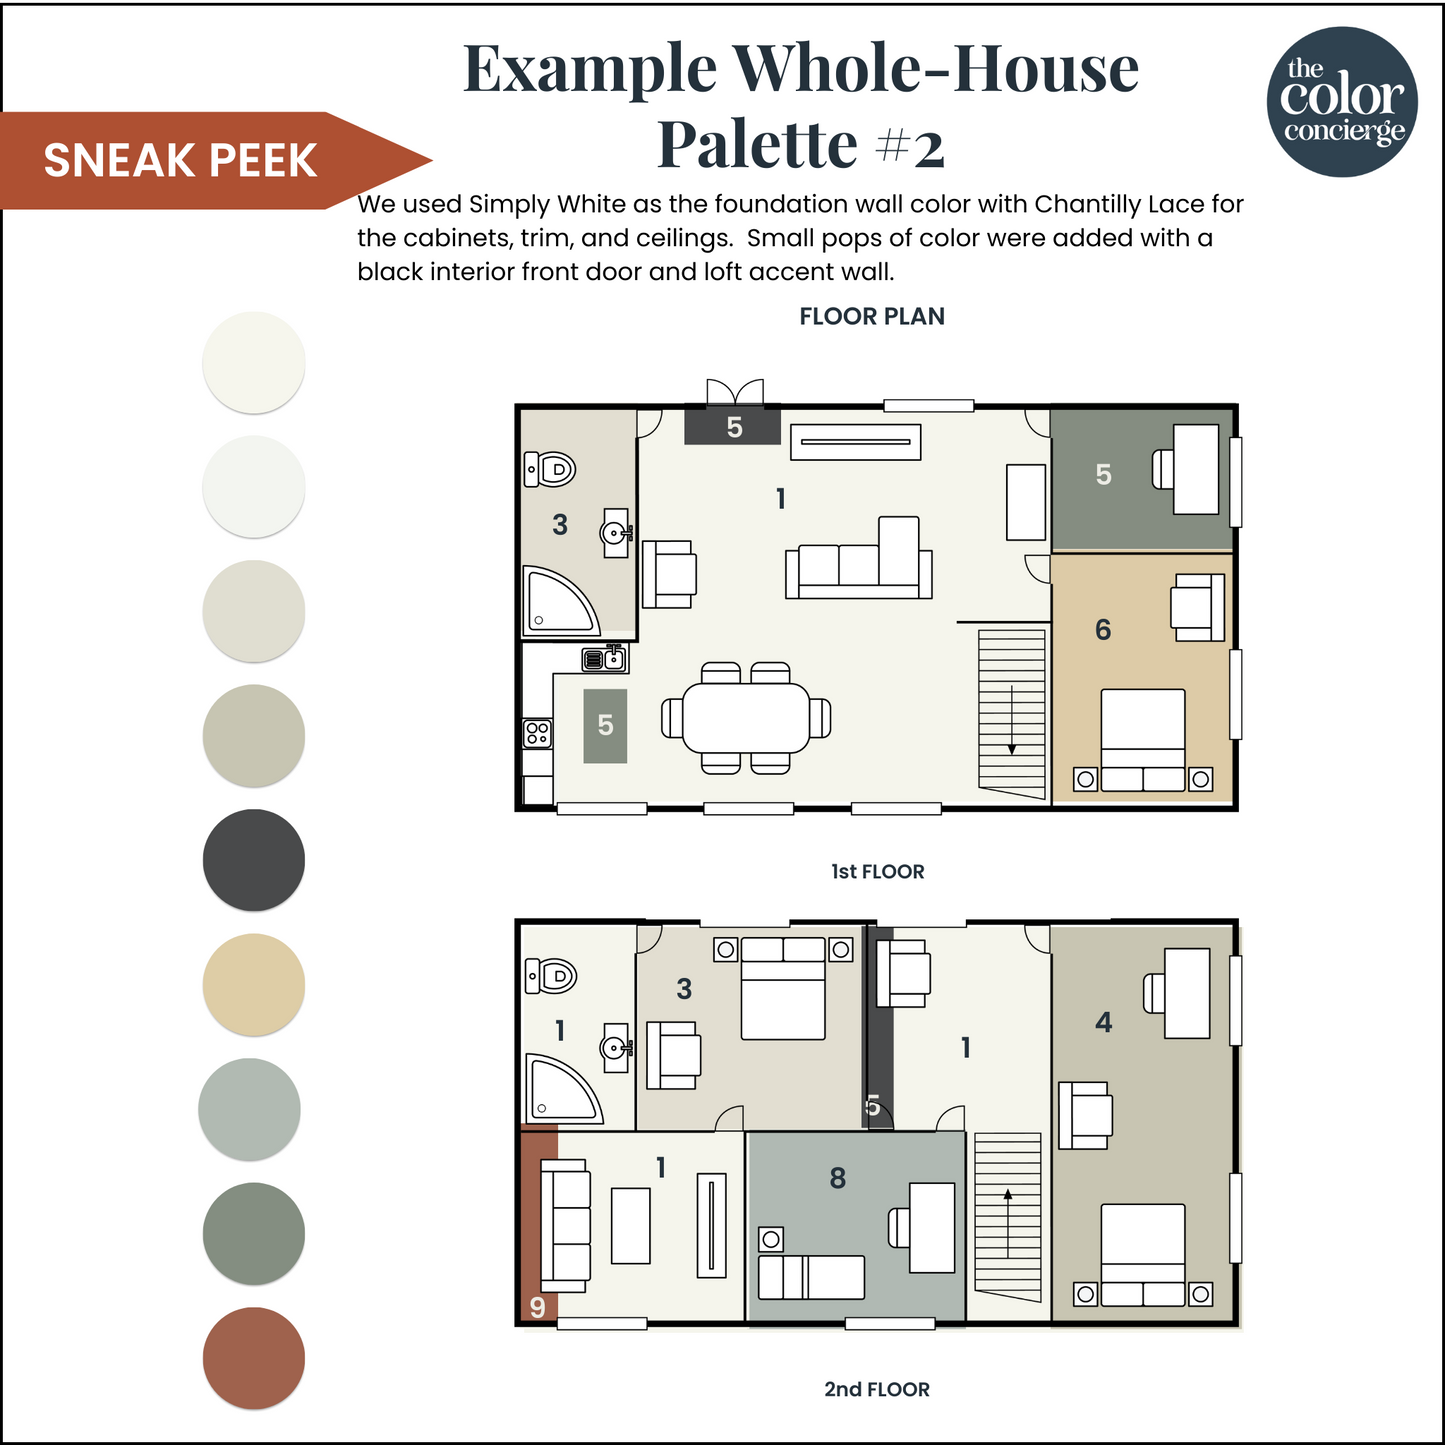 A Benjamin Moore Simply White whole-house color palette mockup